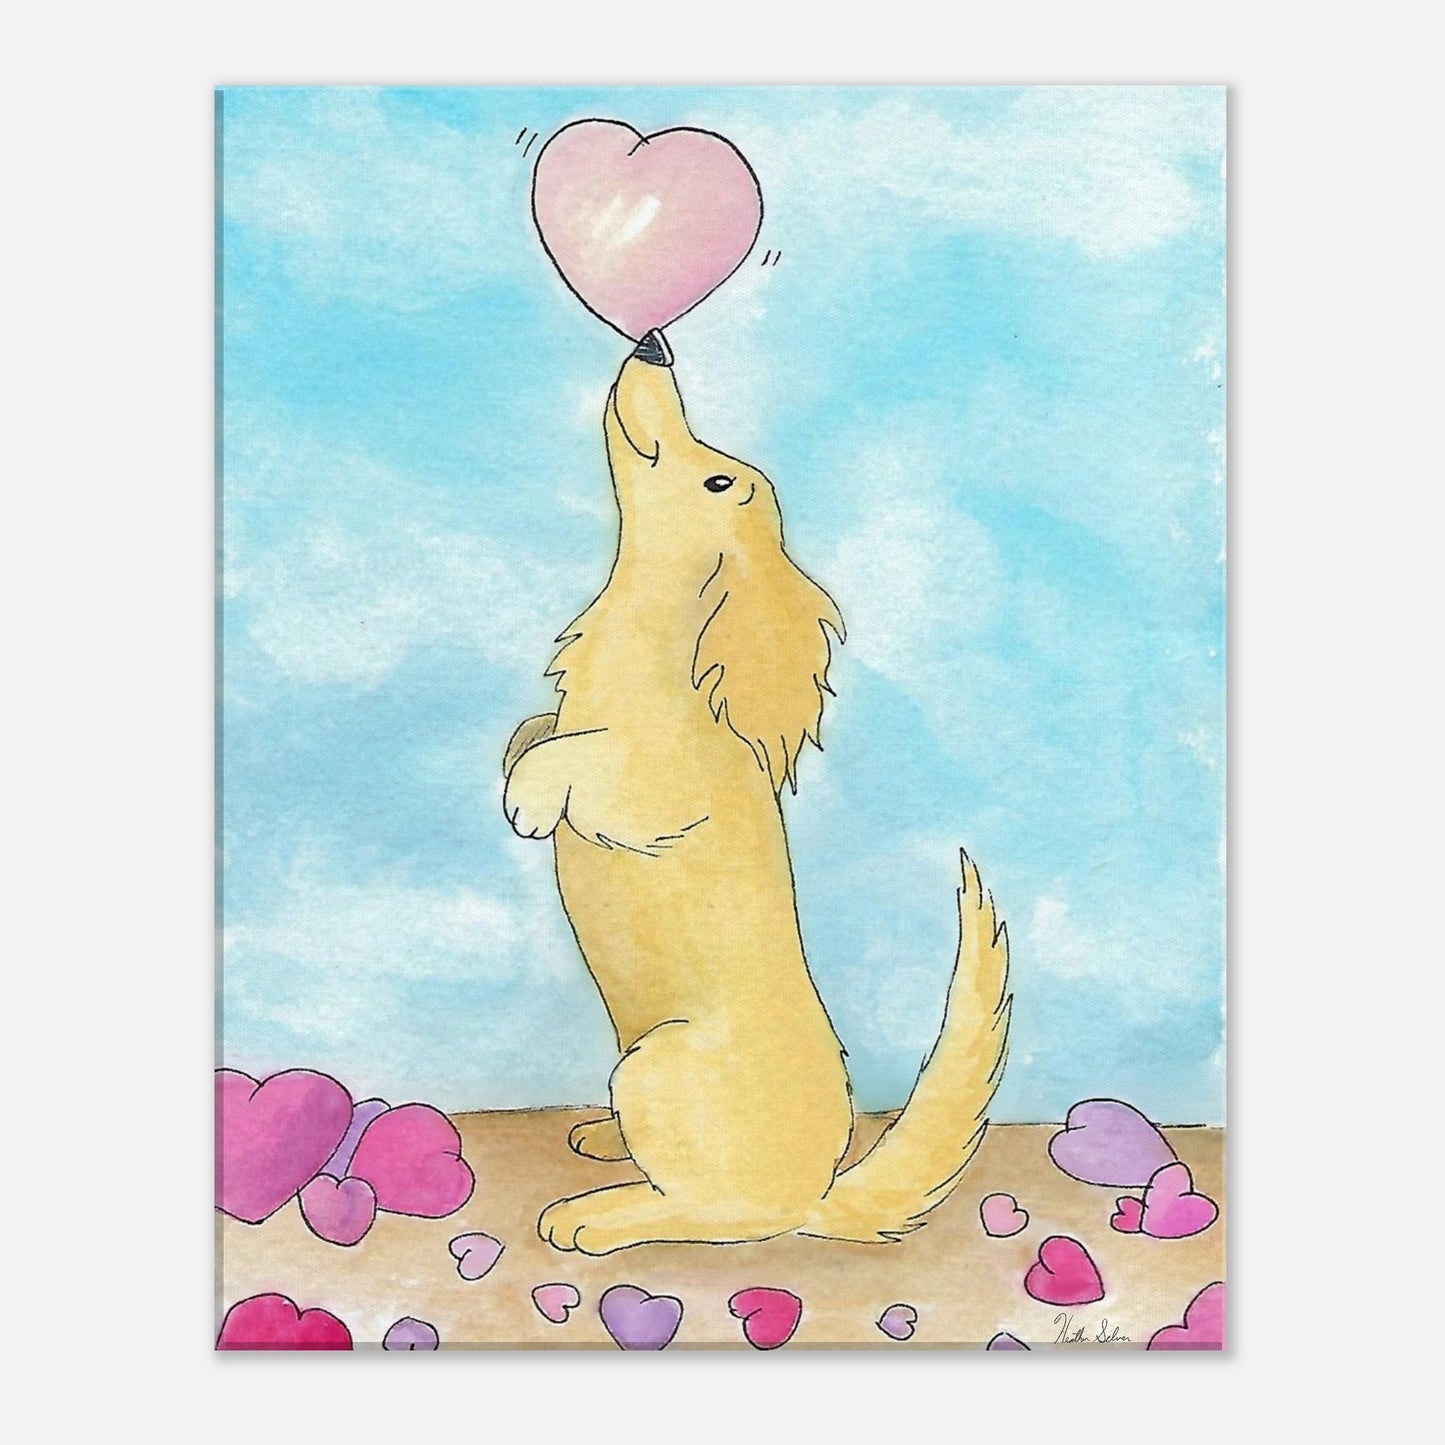 8 by 10 inch canvas wall art print of Heather Silver's watercolor painting, Puppy Love. It features a cute dog balancing a pink heart on its nose against a blue sky background.